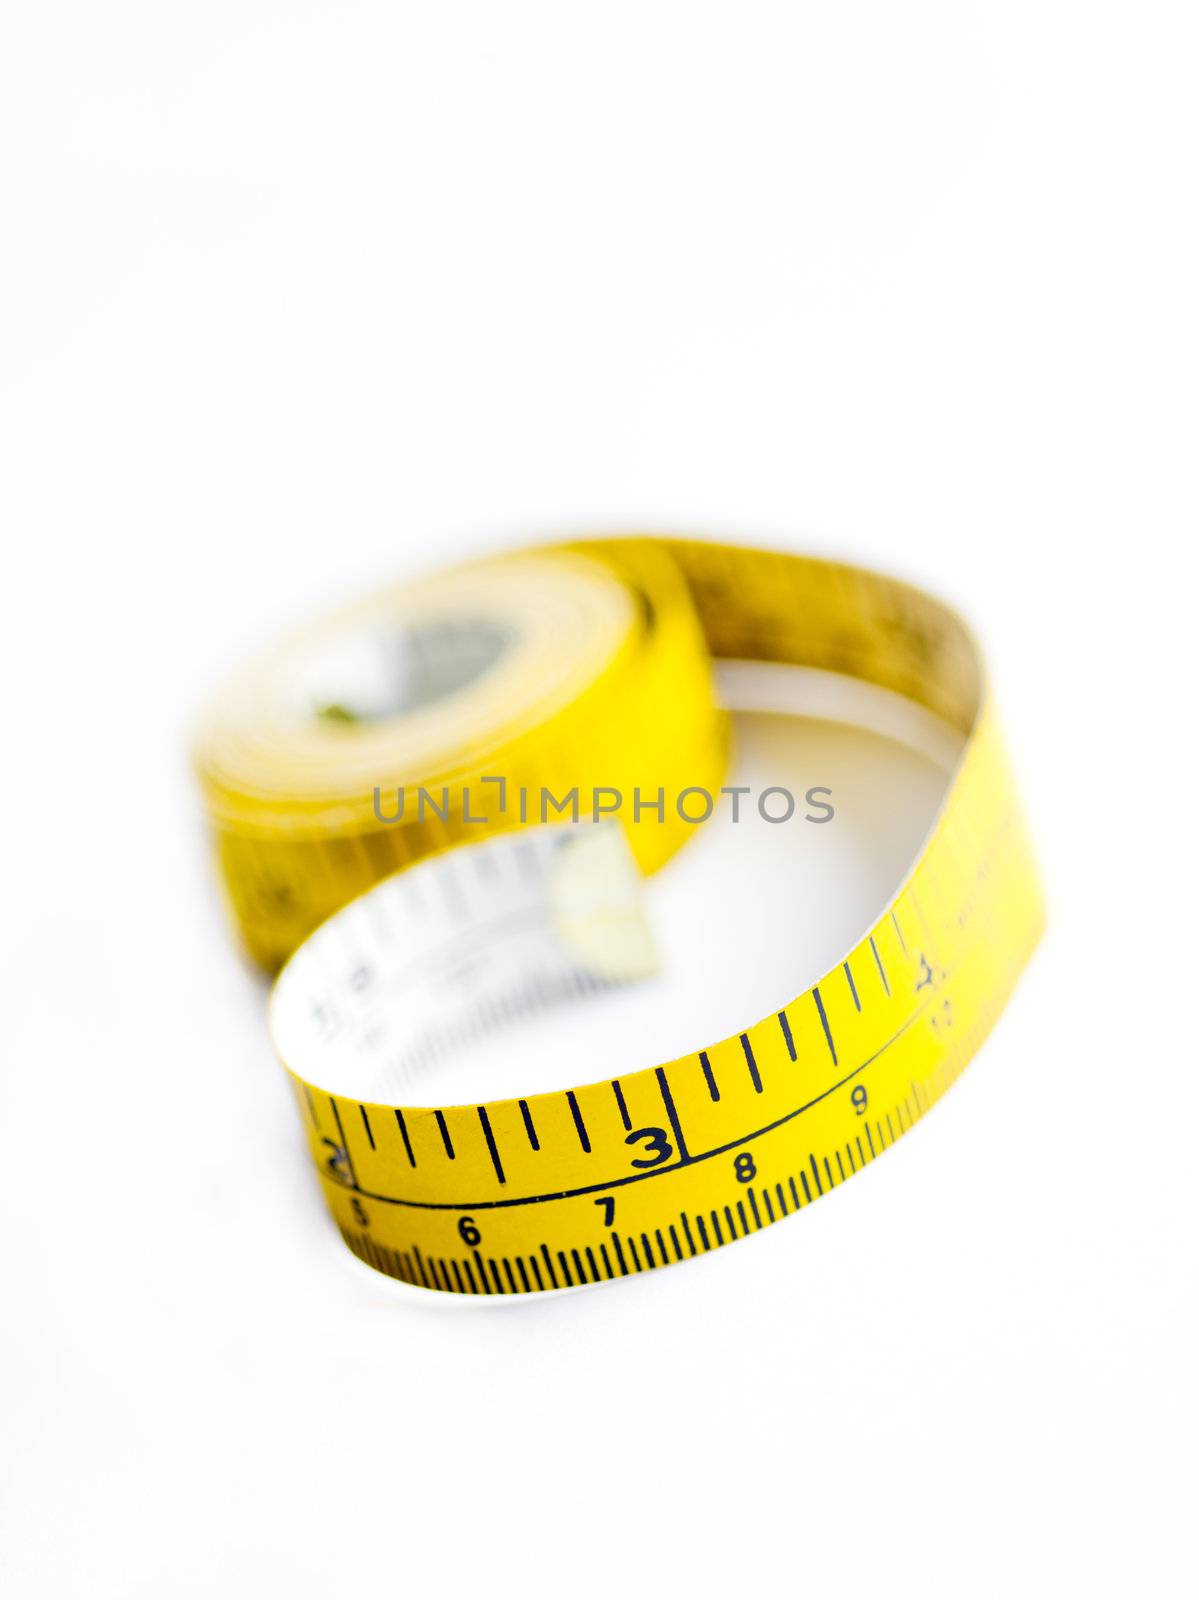 A mostly rolled up measuring tape on a white surface.